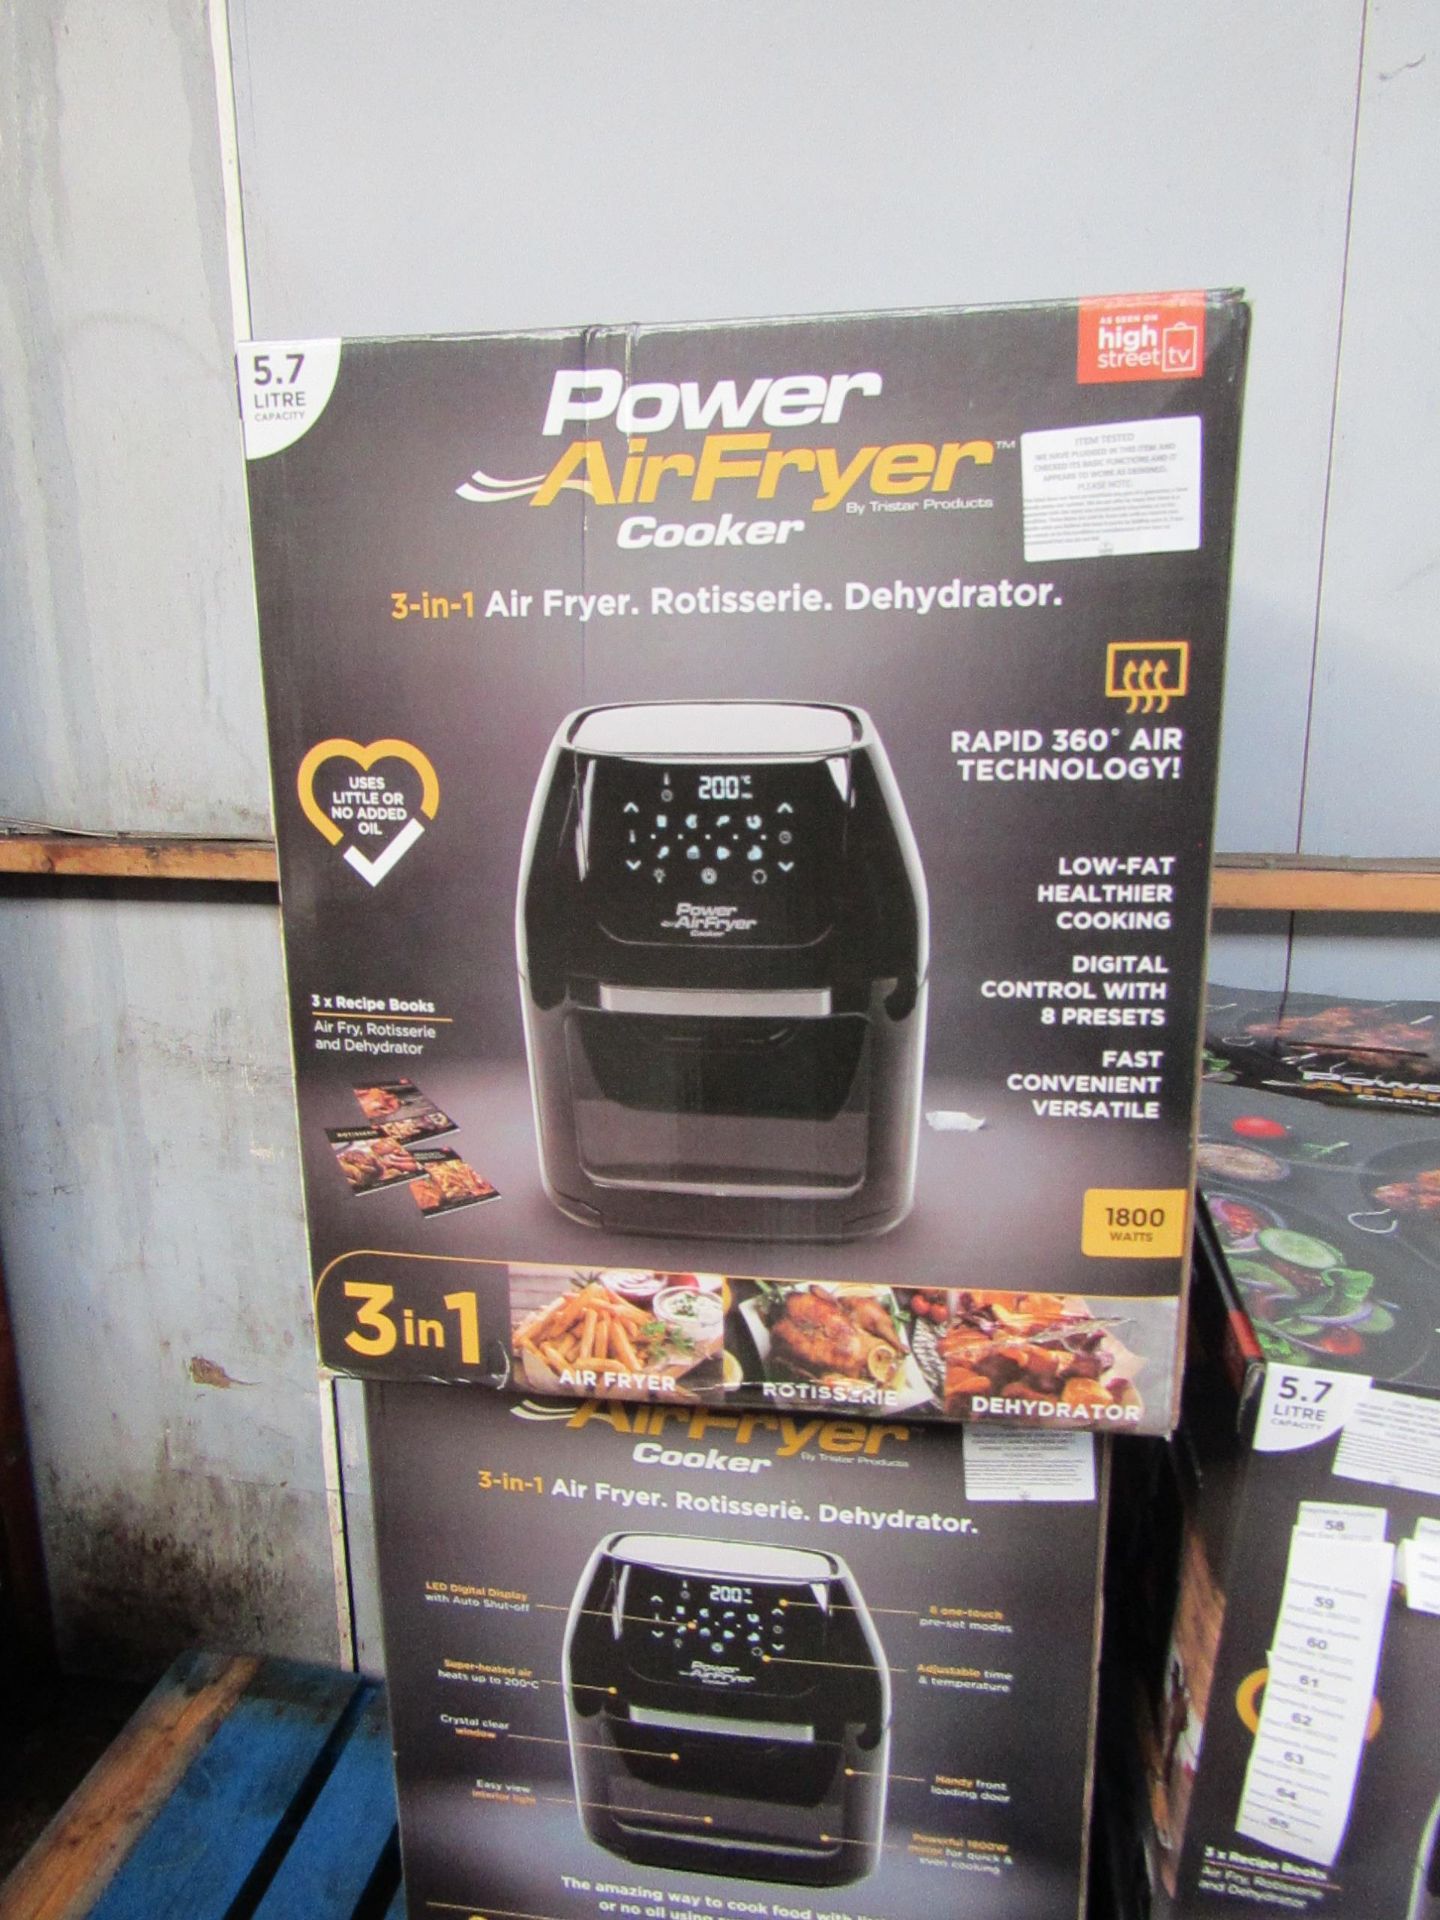 | 1x | Power Air Fryer 3 in 1 5.7L | tested working, boxed and unchecked for accessories | no online